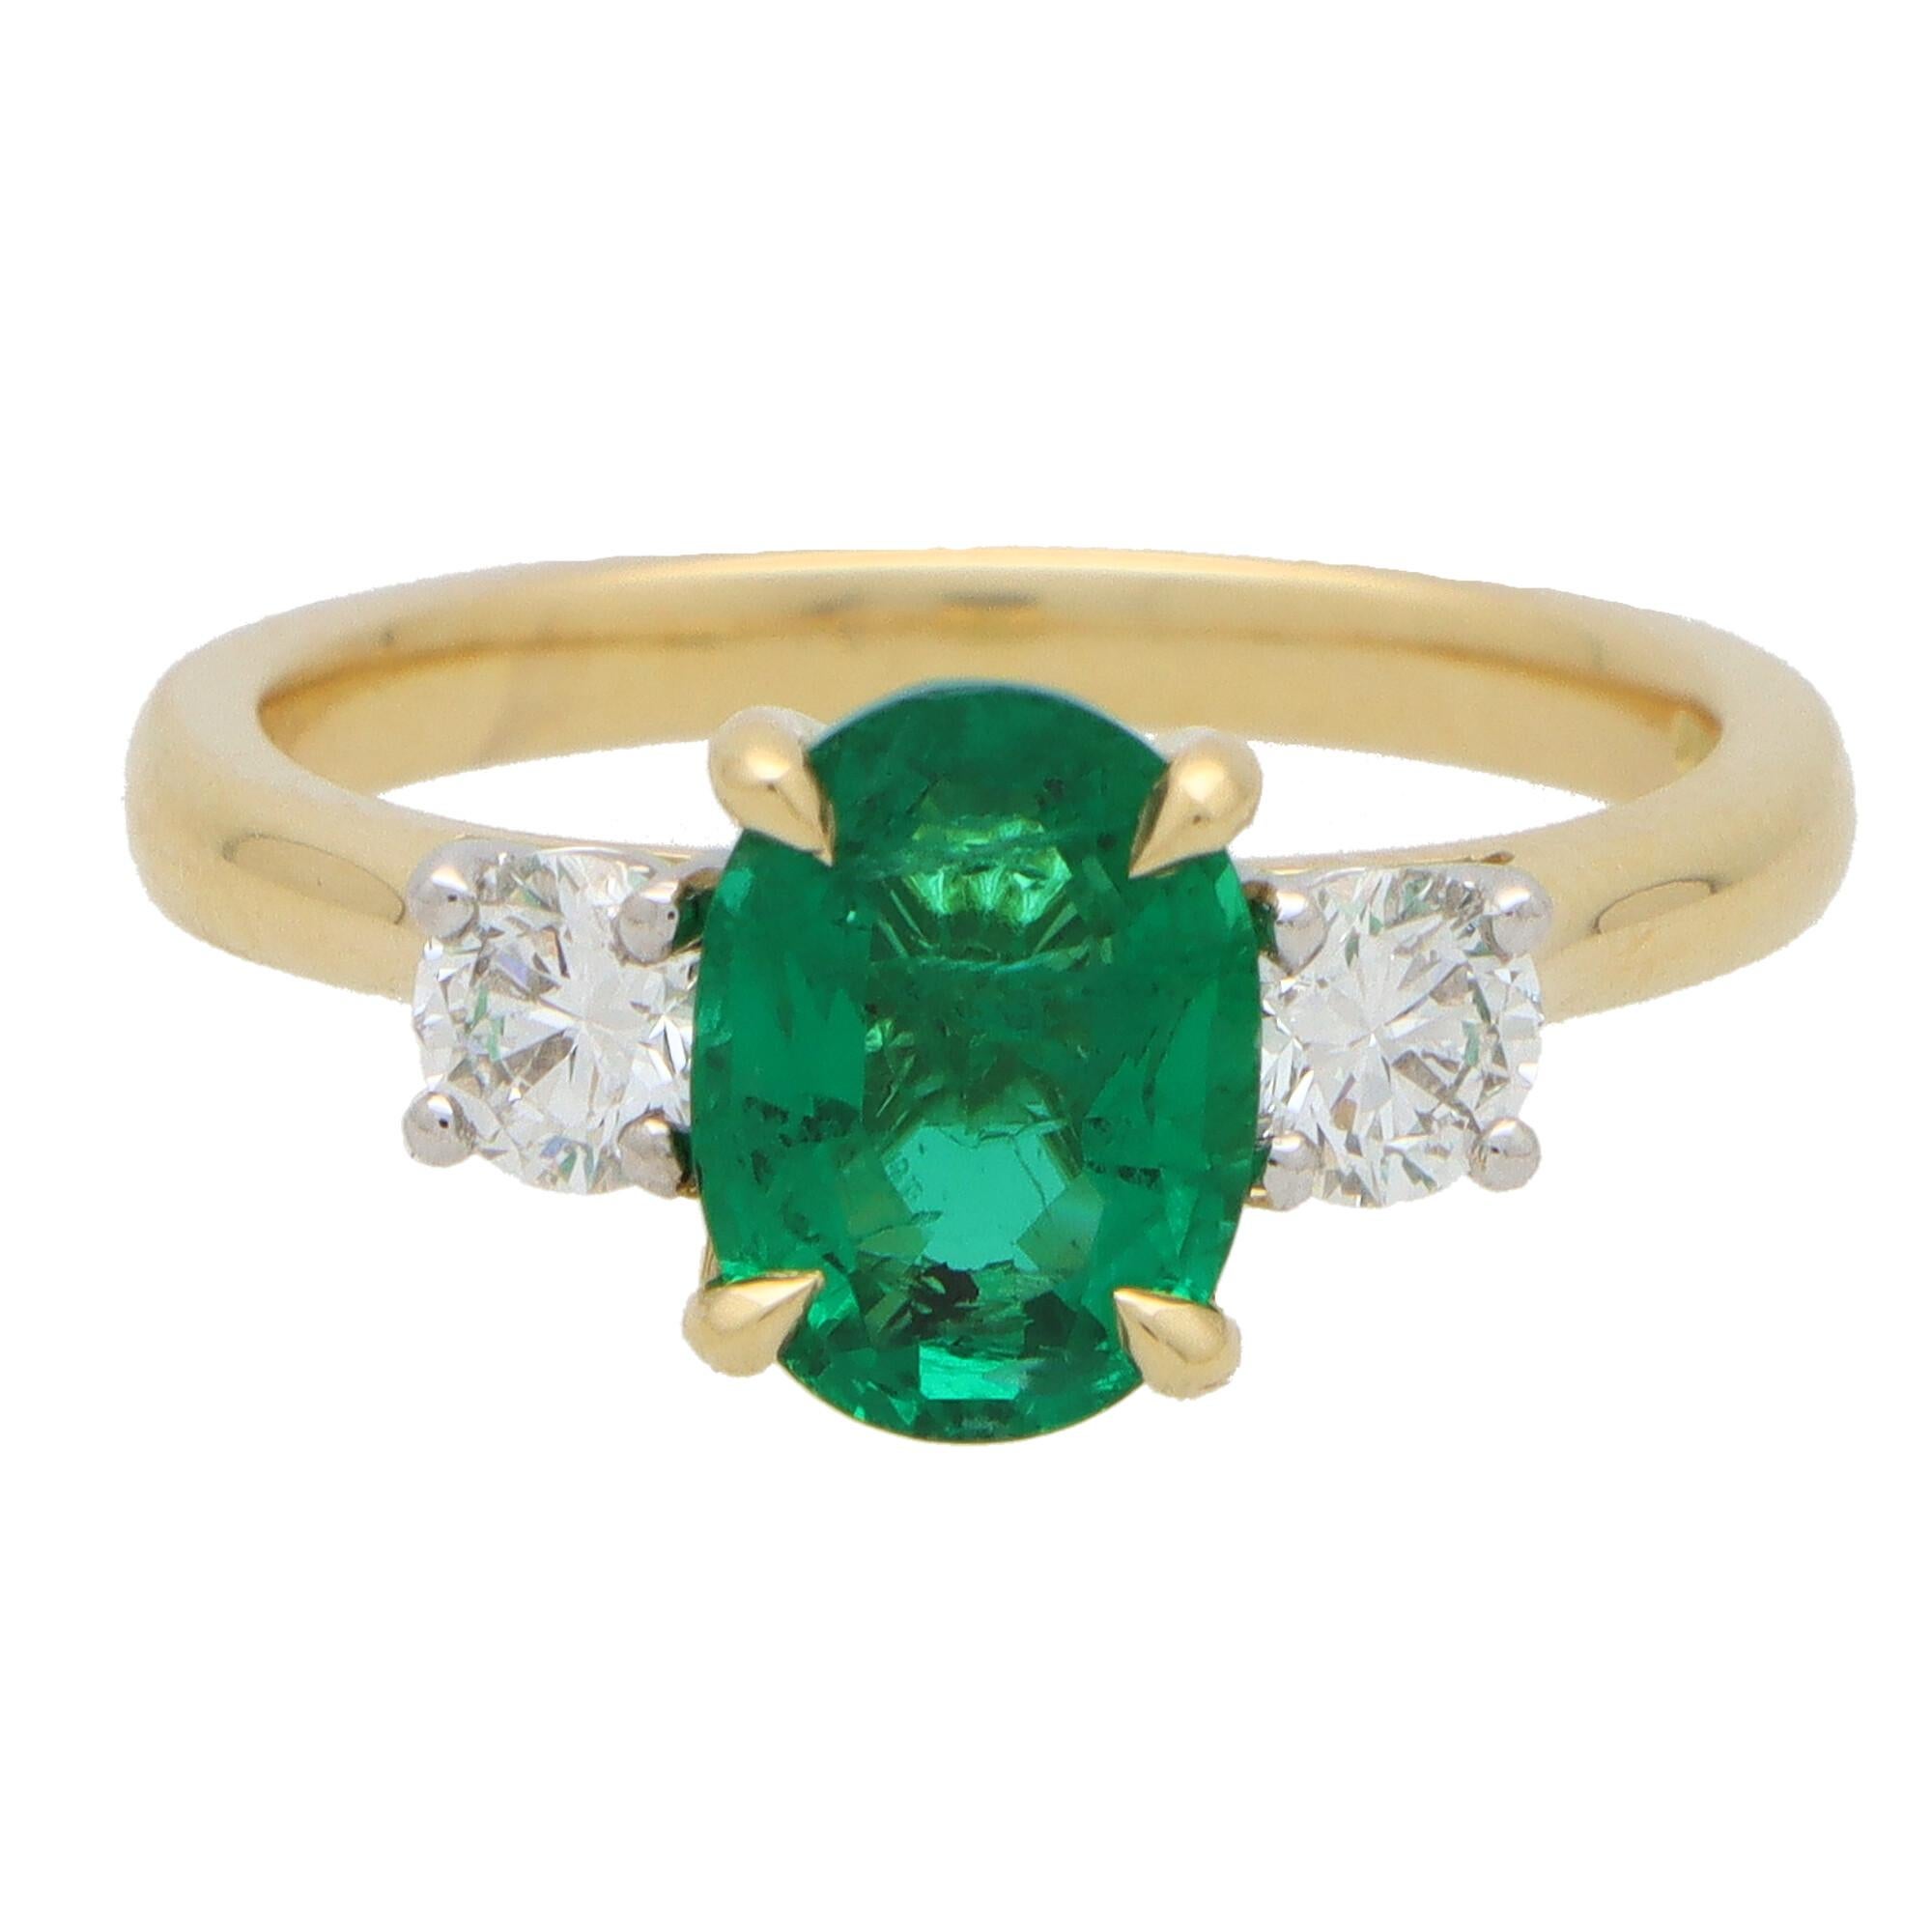 Oval Cut GIA Certified Emerald and Diamond Three Stone Ring Set in 18k Yellow Gold